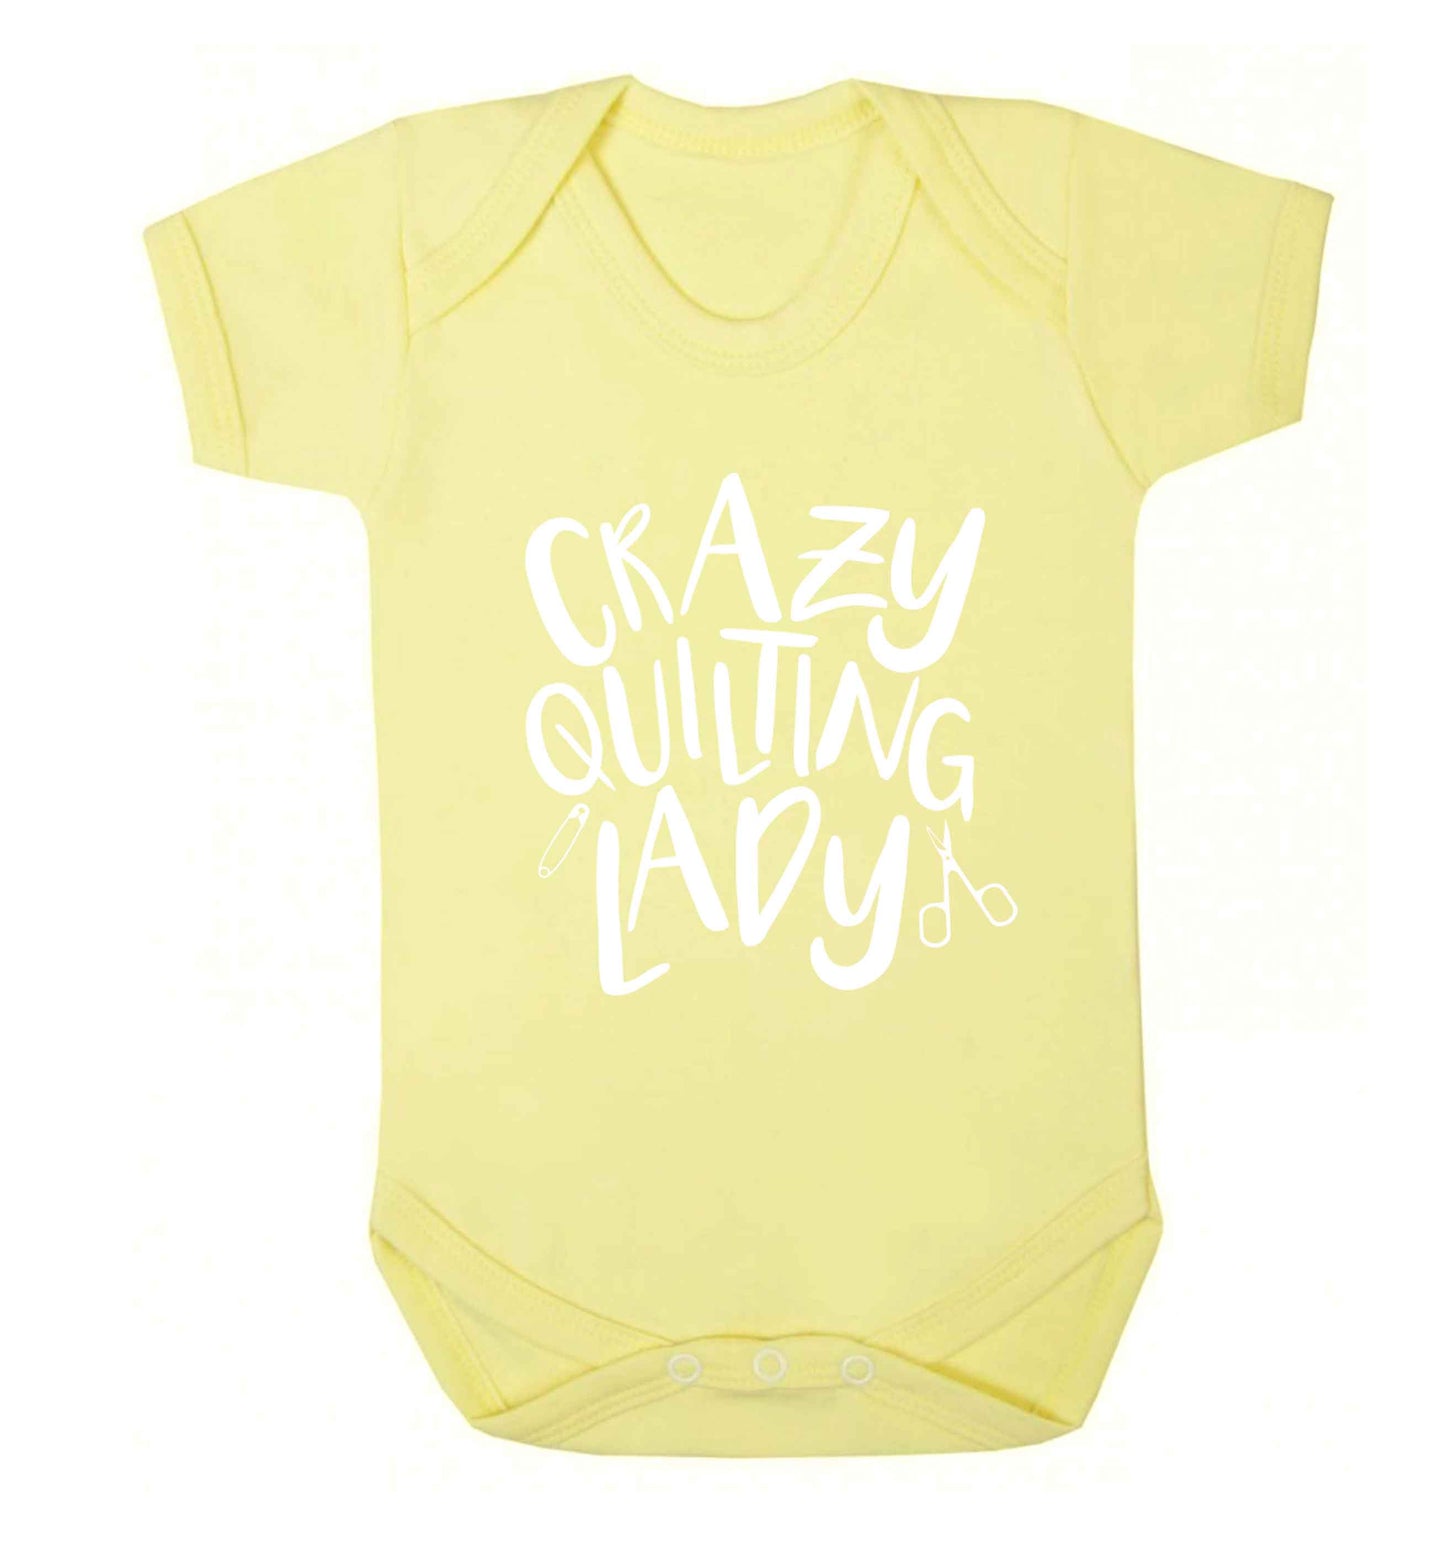 Crazy quilting lady Baby Vest pale yellow 18-24 months